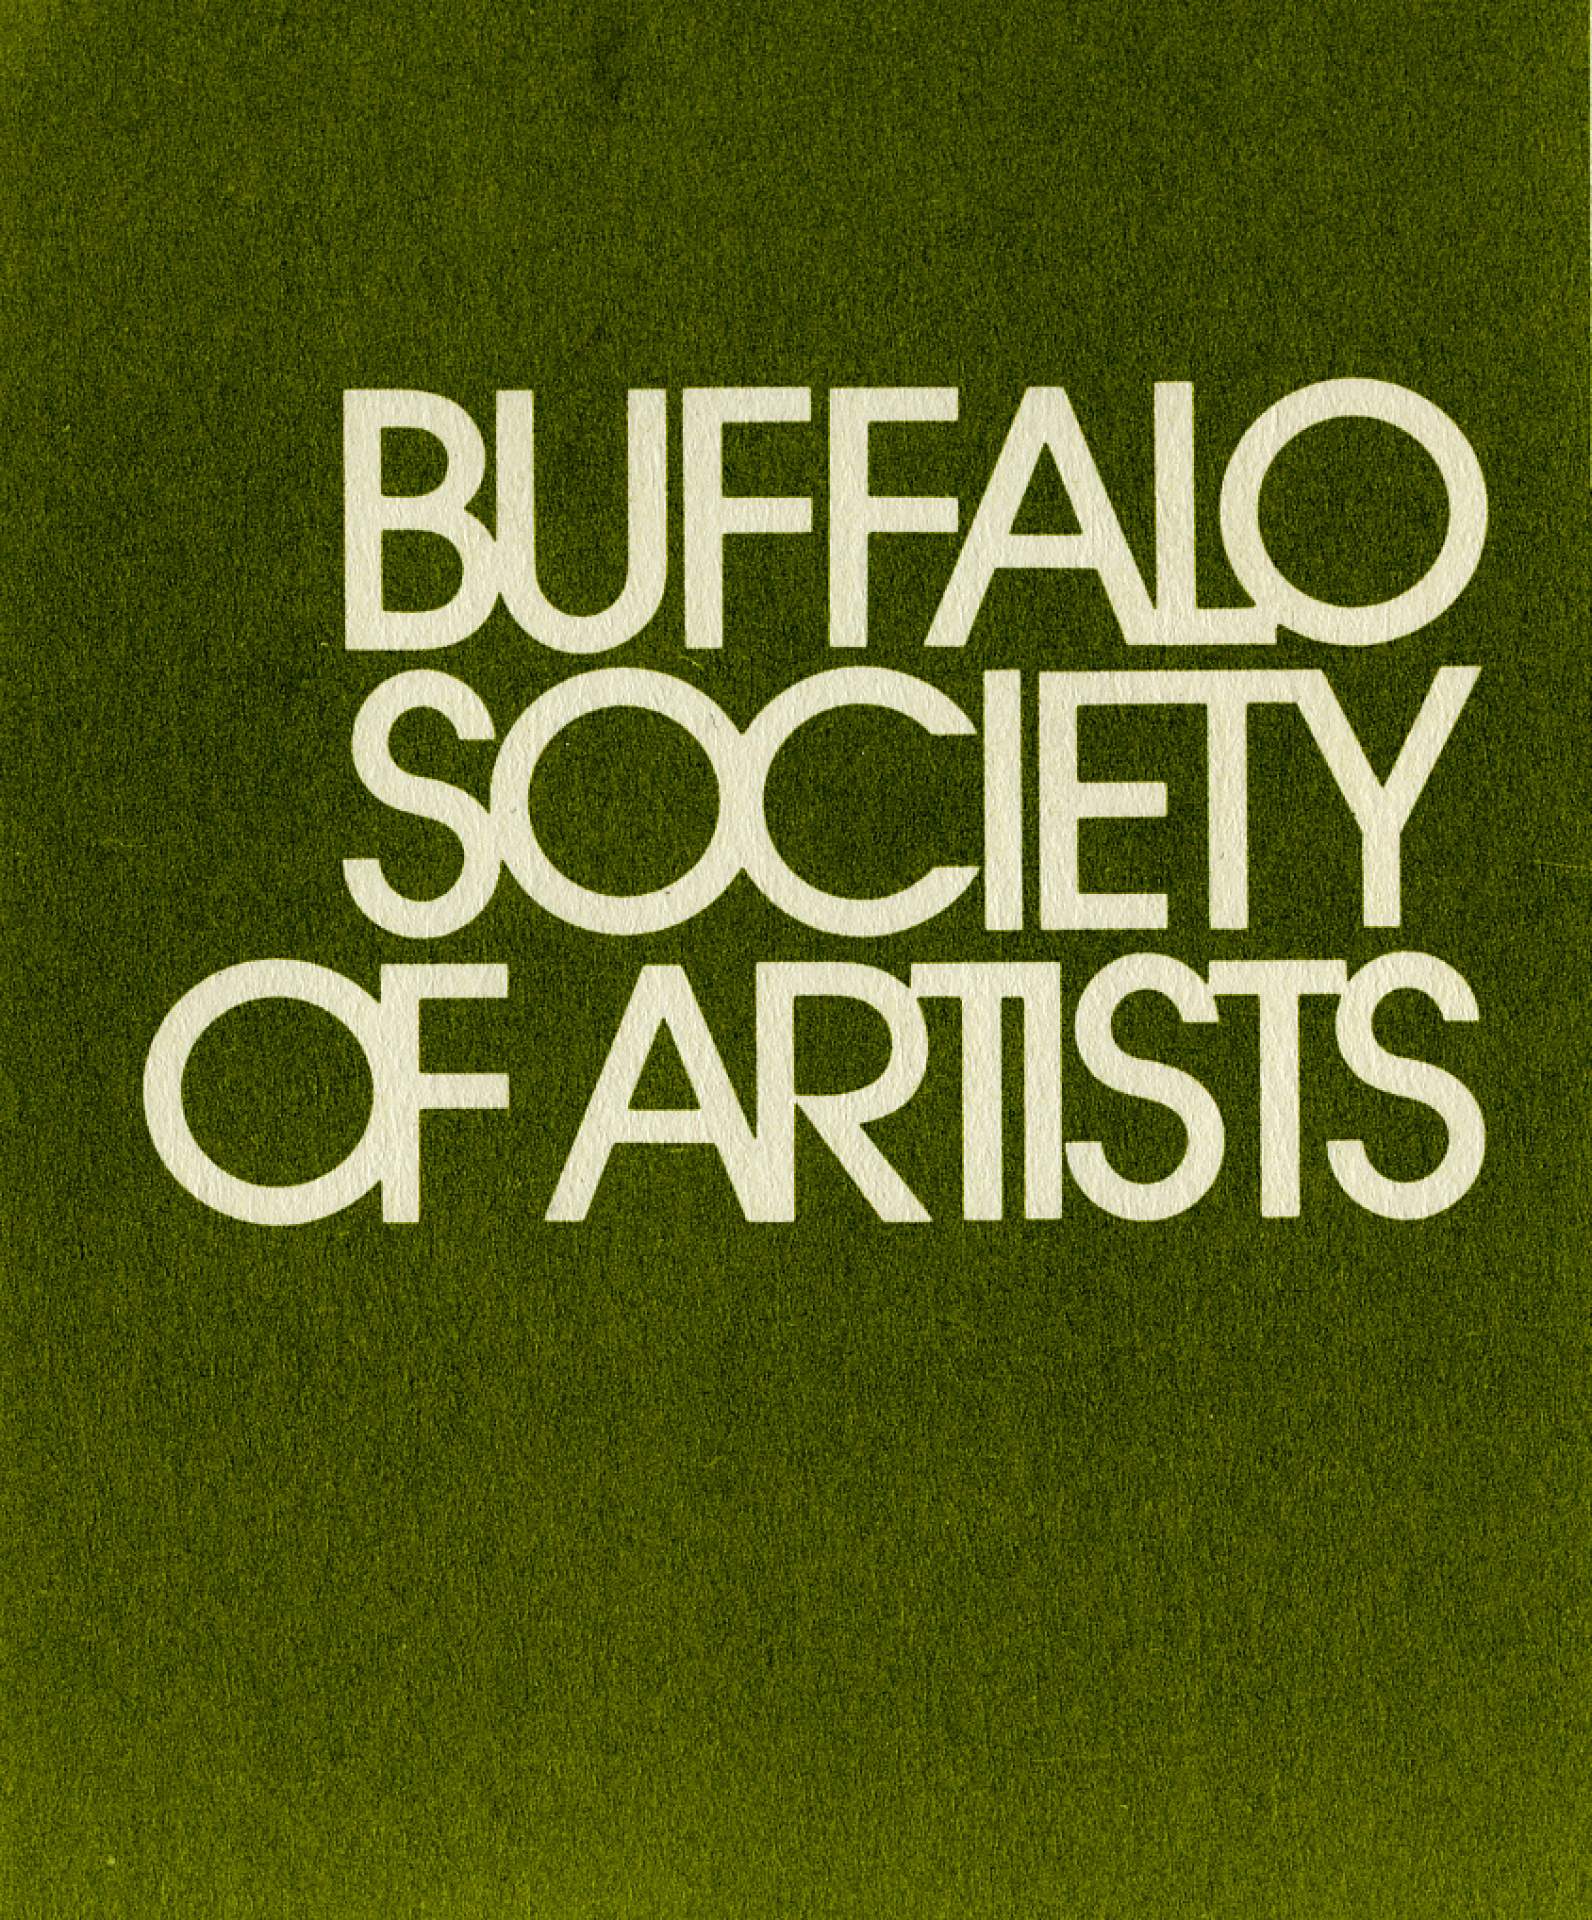 83rd Annual Buffalo Society of Artists invitation title